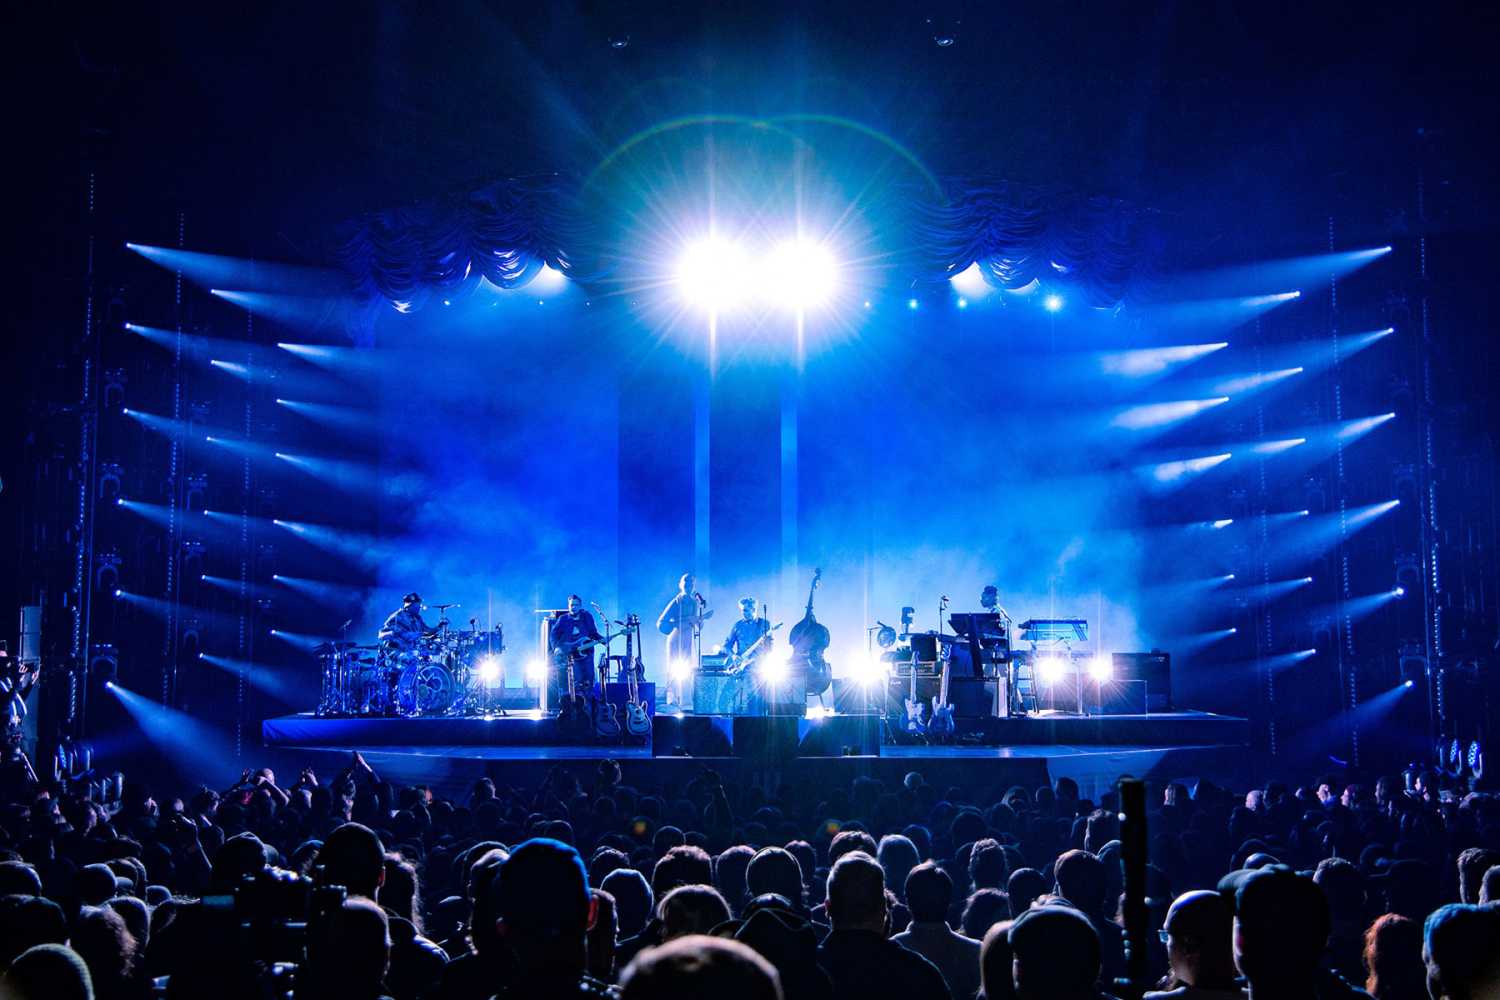 Jack White’s Supply Chain Issues world tour is currently playing its first US leg (photo: LUZ Studio)